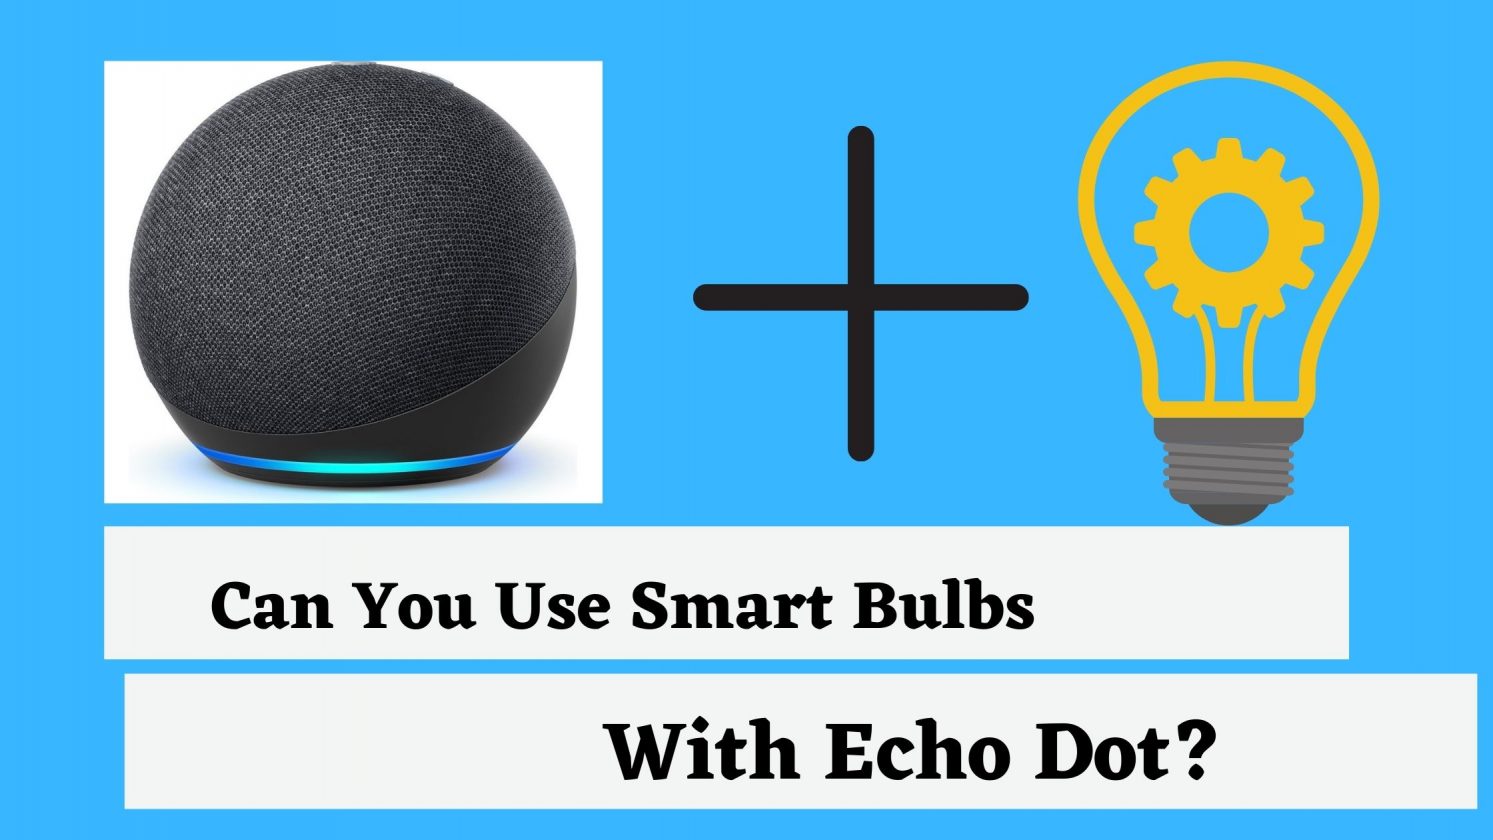 Can You Use Smart Bulbs With Echo Dot?